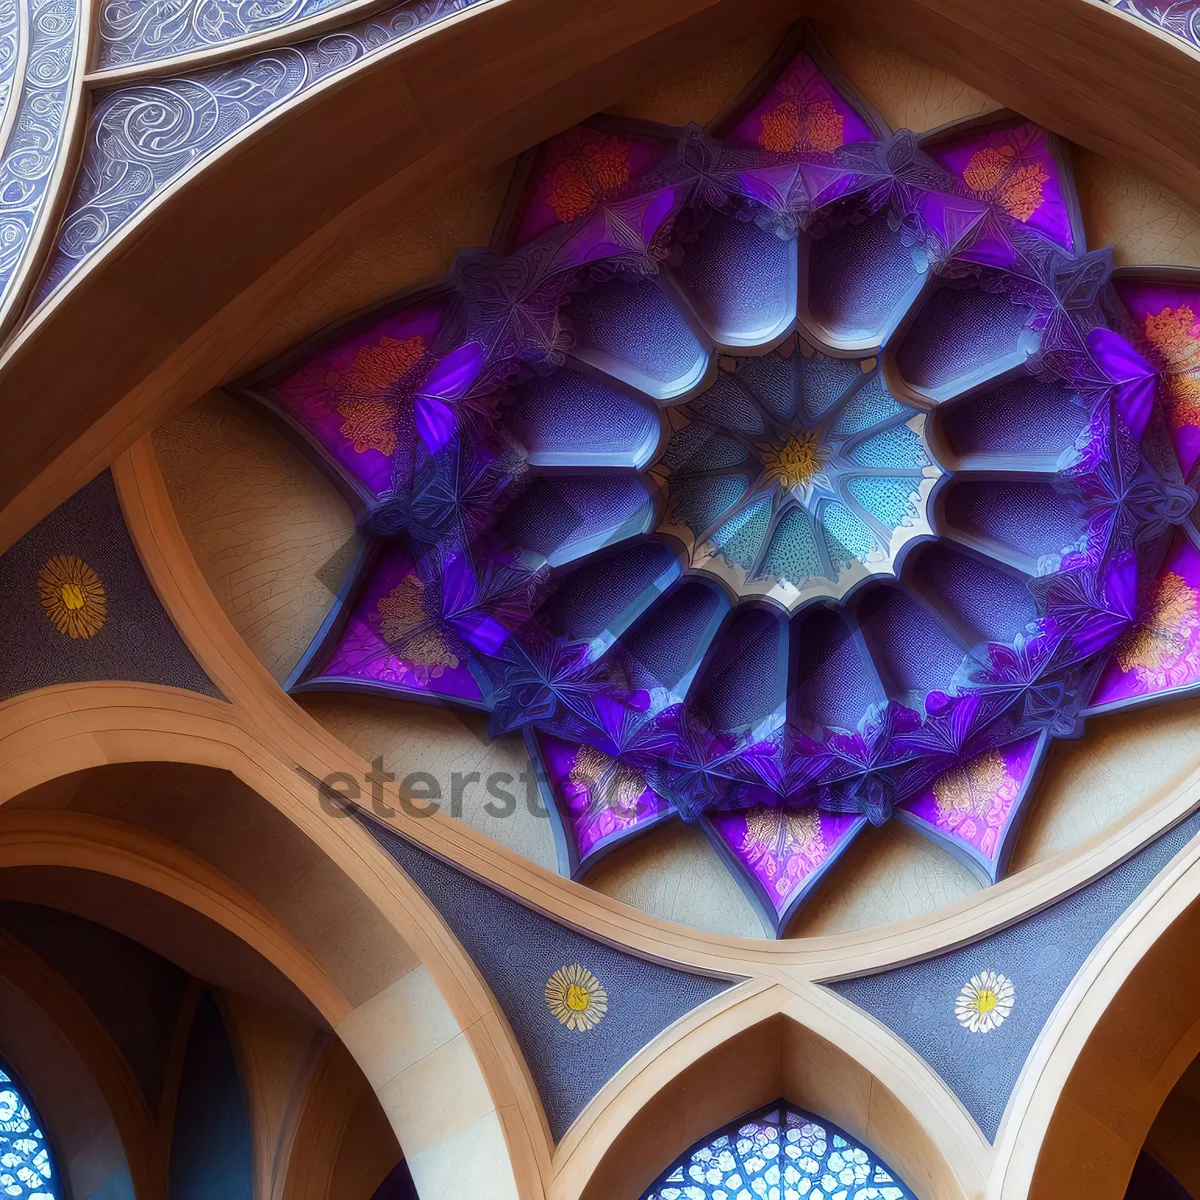 Picture of Colorful Dome Ceiling in Old Architectural Interior